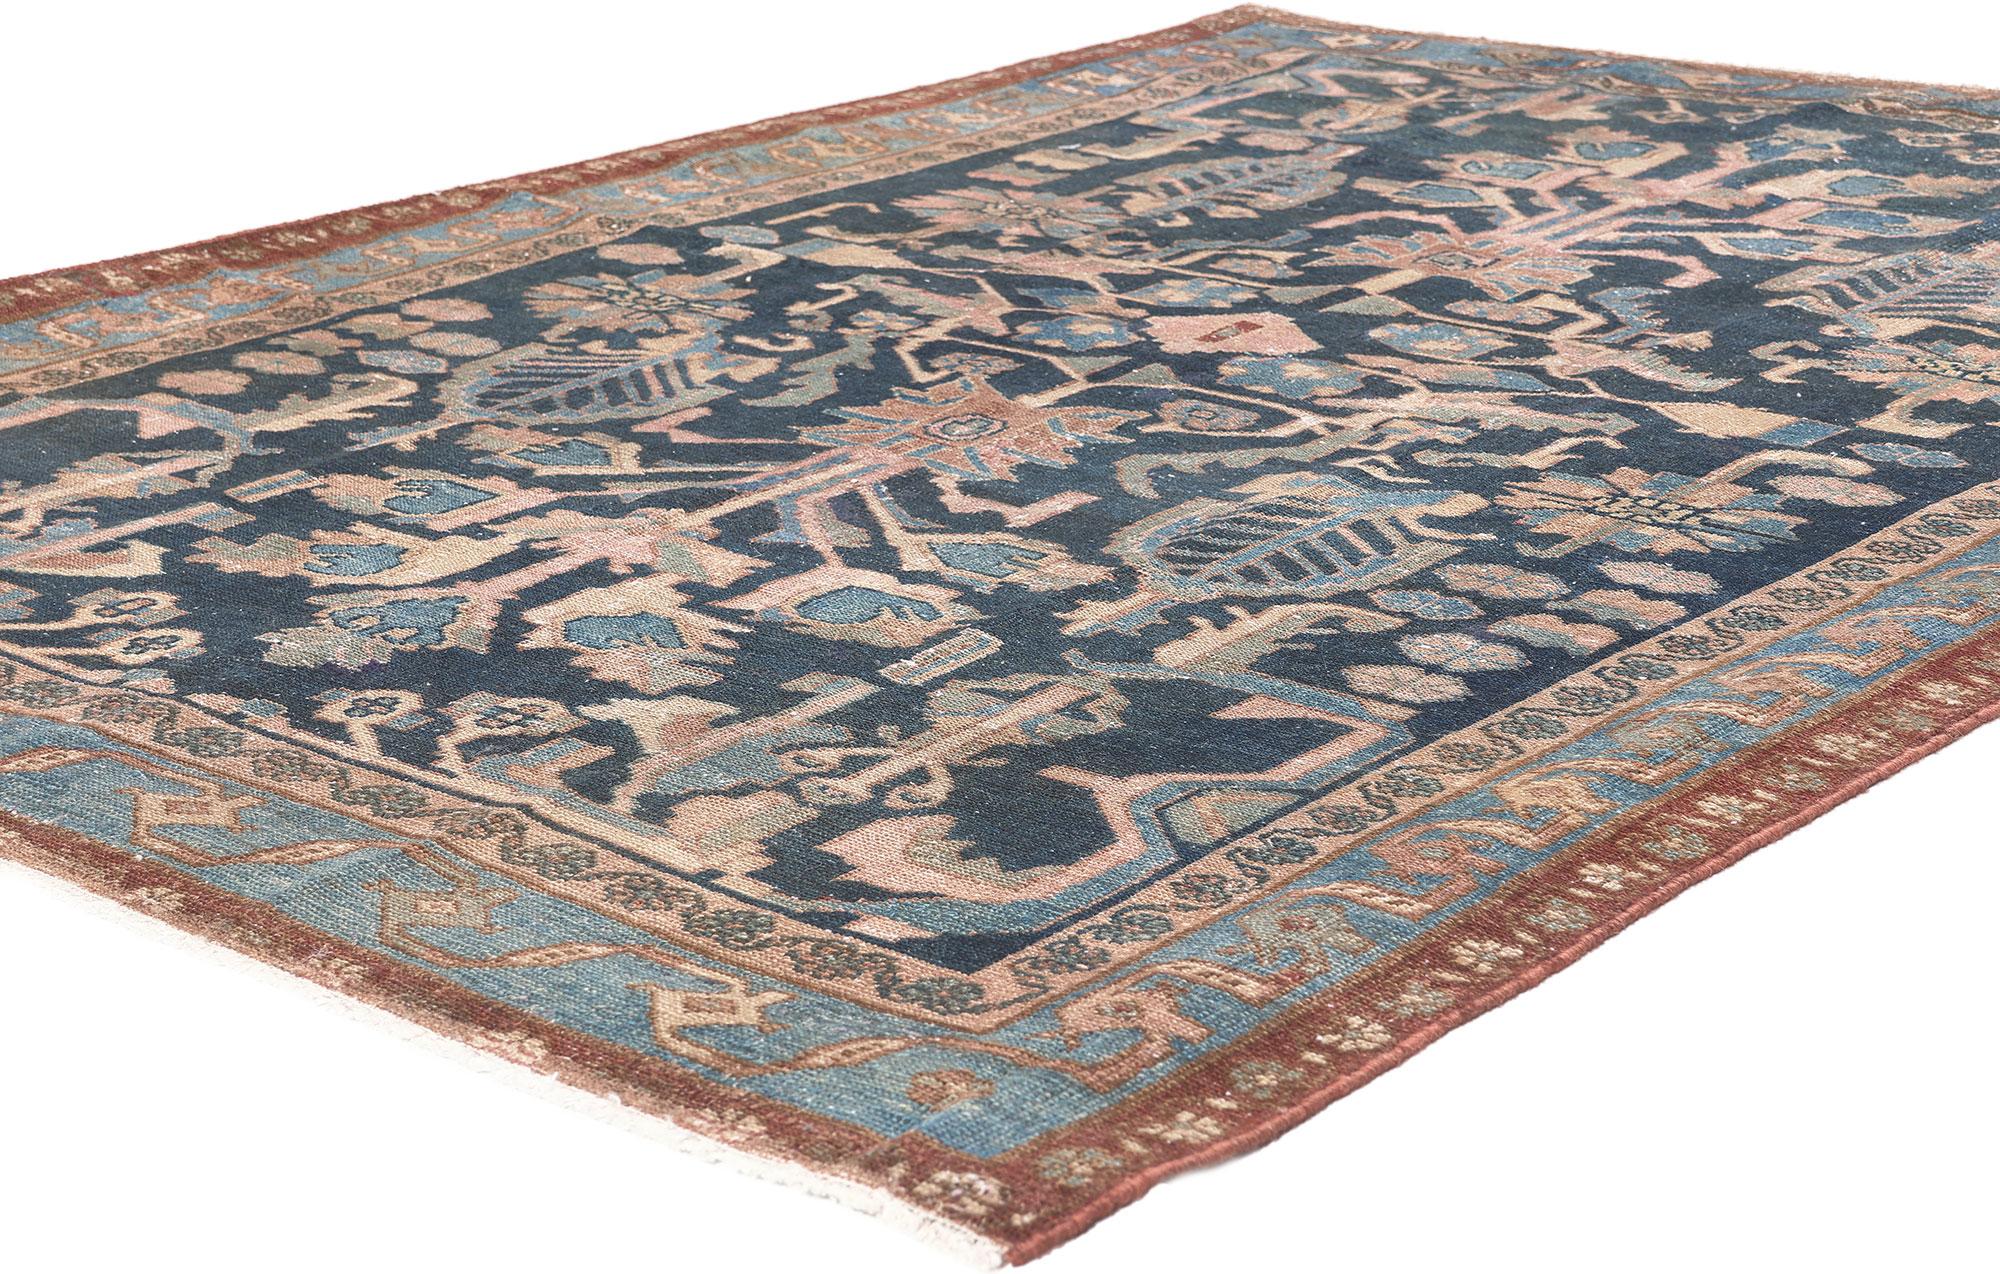 61277 Antique Persian Malayer Rug, 04'05 x 06'05. Experience the exquisite harmony where sophisticated elegance meets rustic sensibility in this hand-knotted wool distressed antique Persian Malayer rug. An allover geometric pattern adorned with